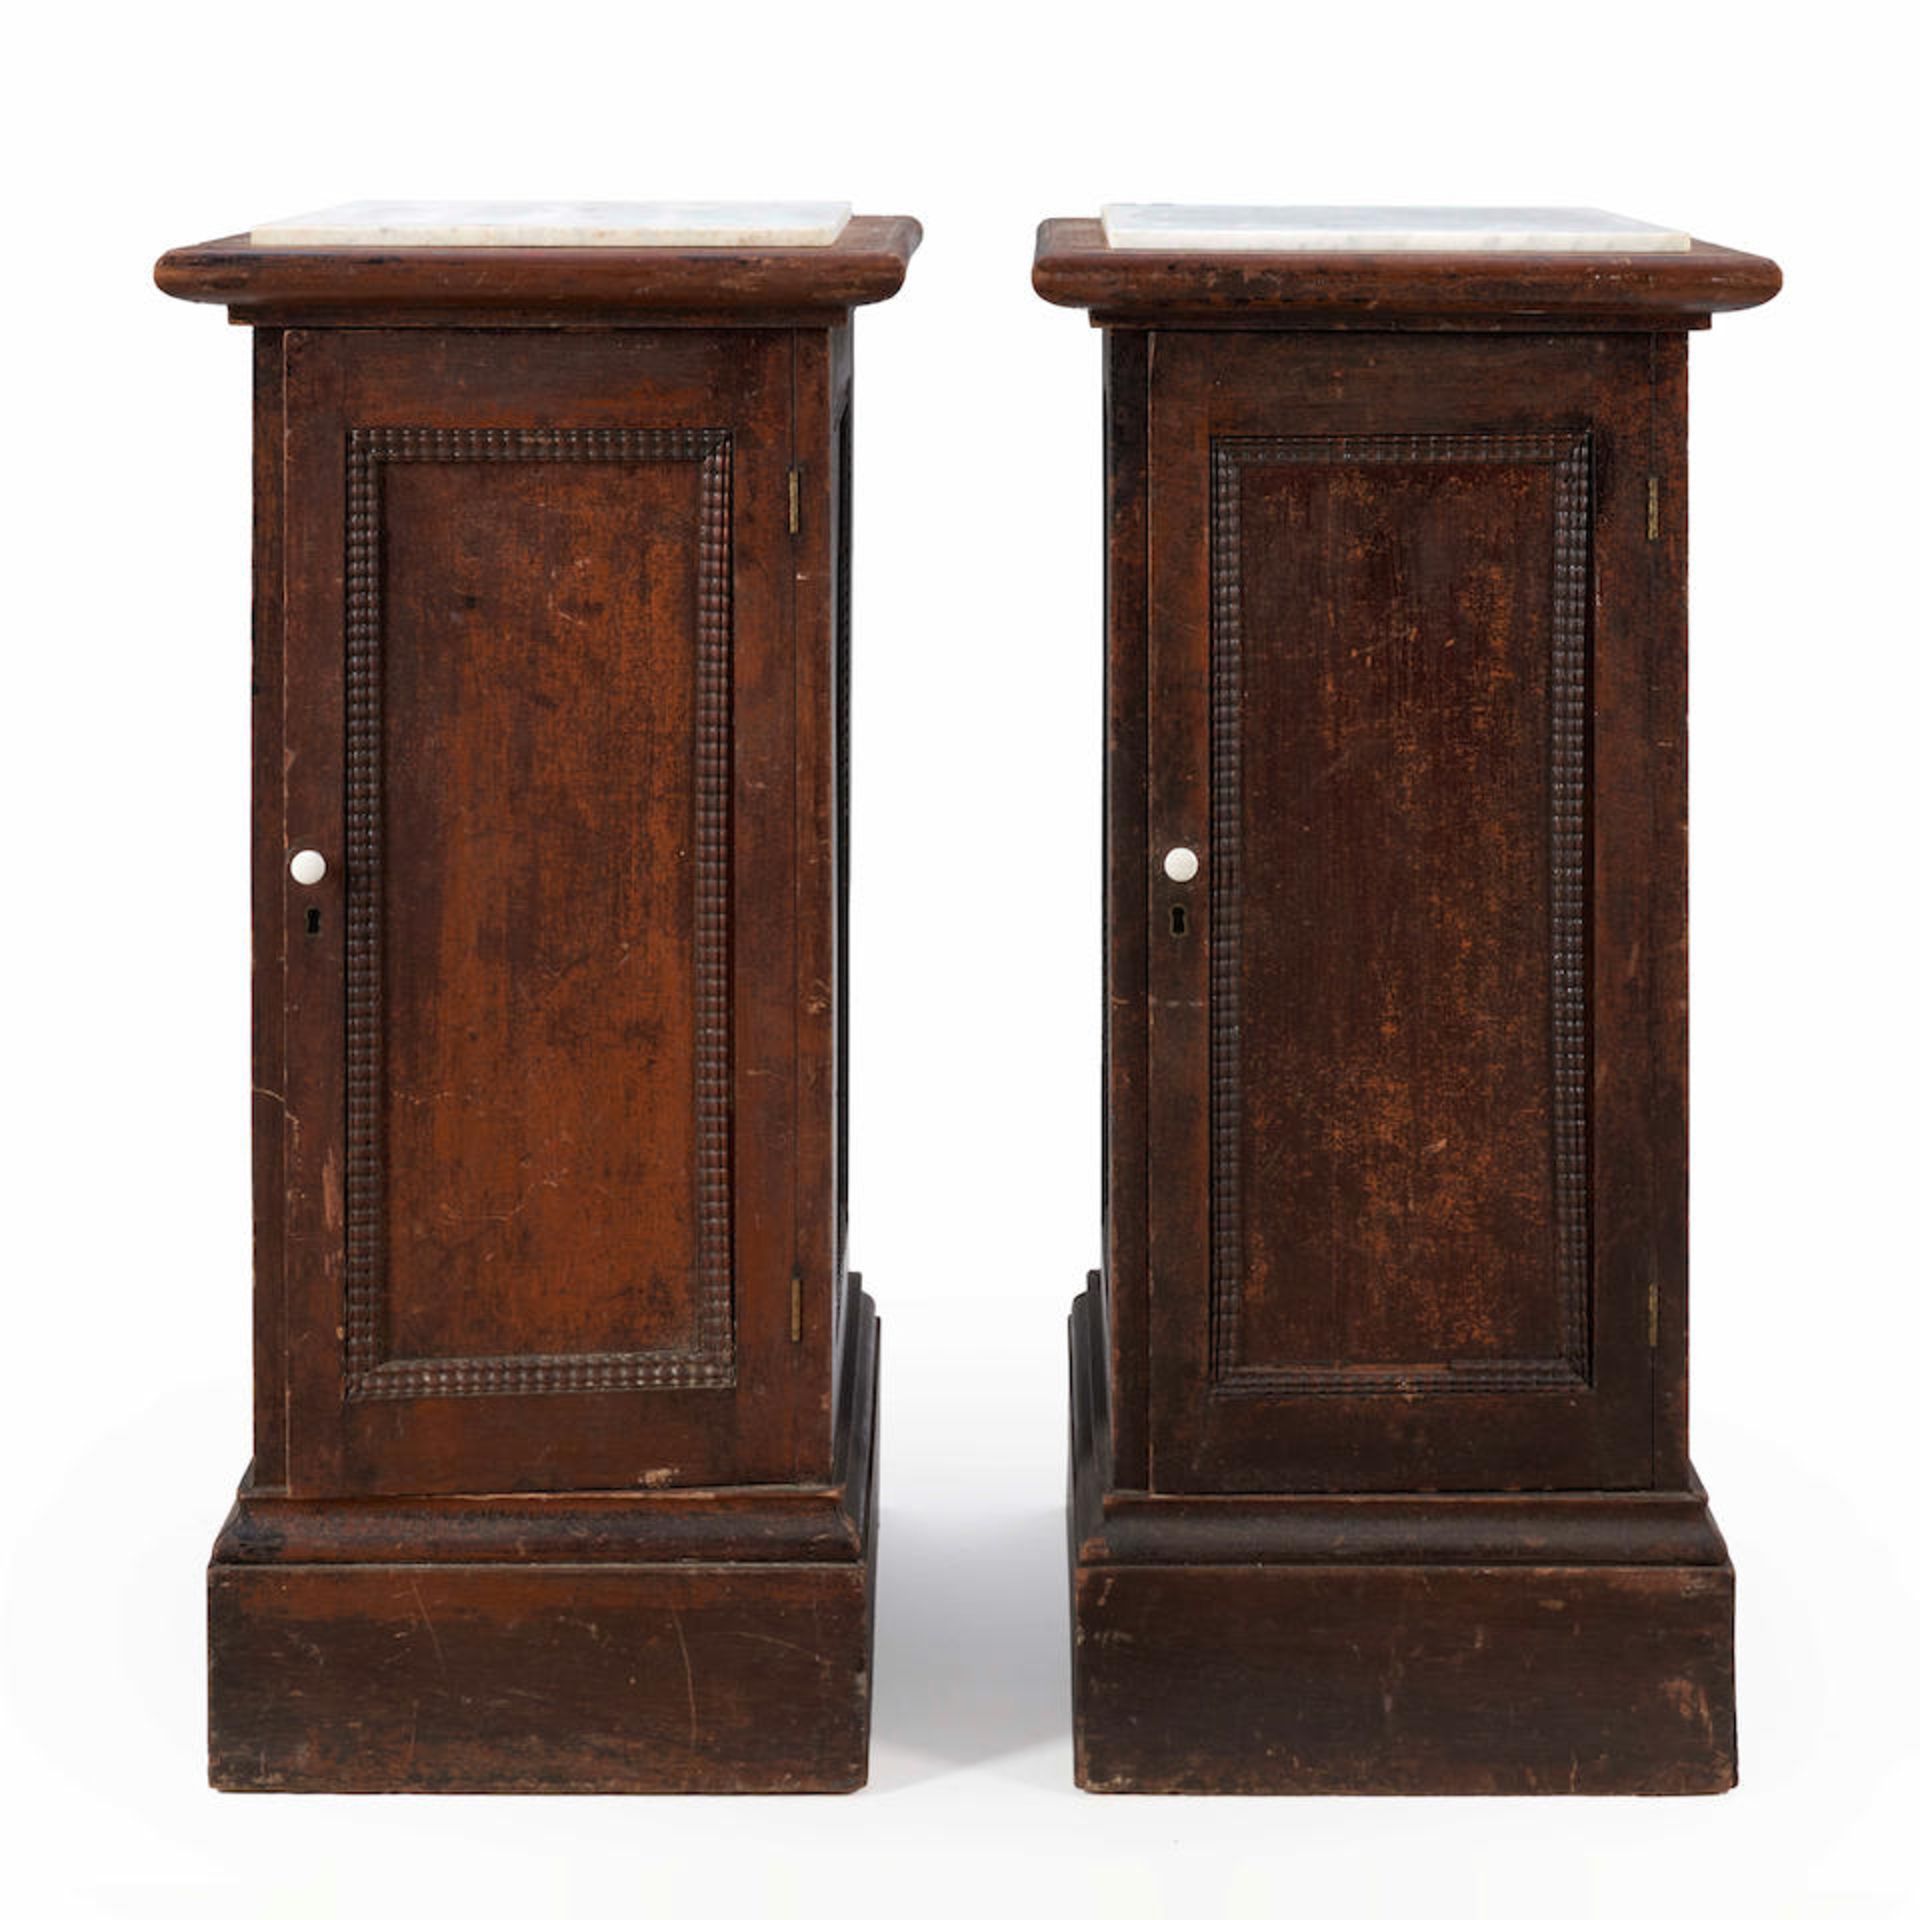 PAIR OF VICTORIAN MARBLE-TOP CARVED PINE STANDS